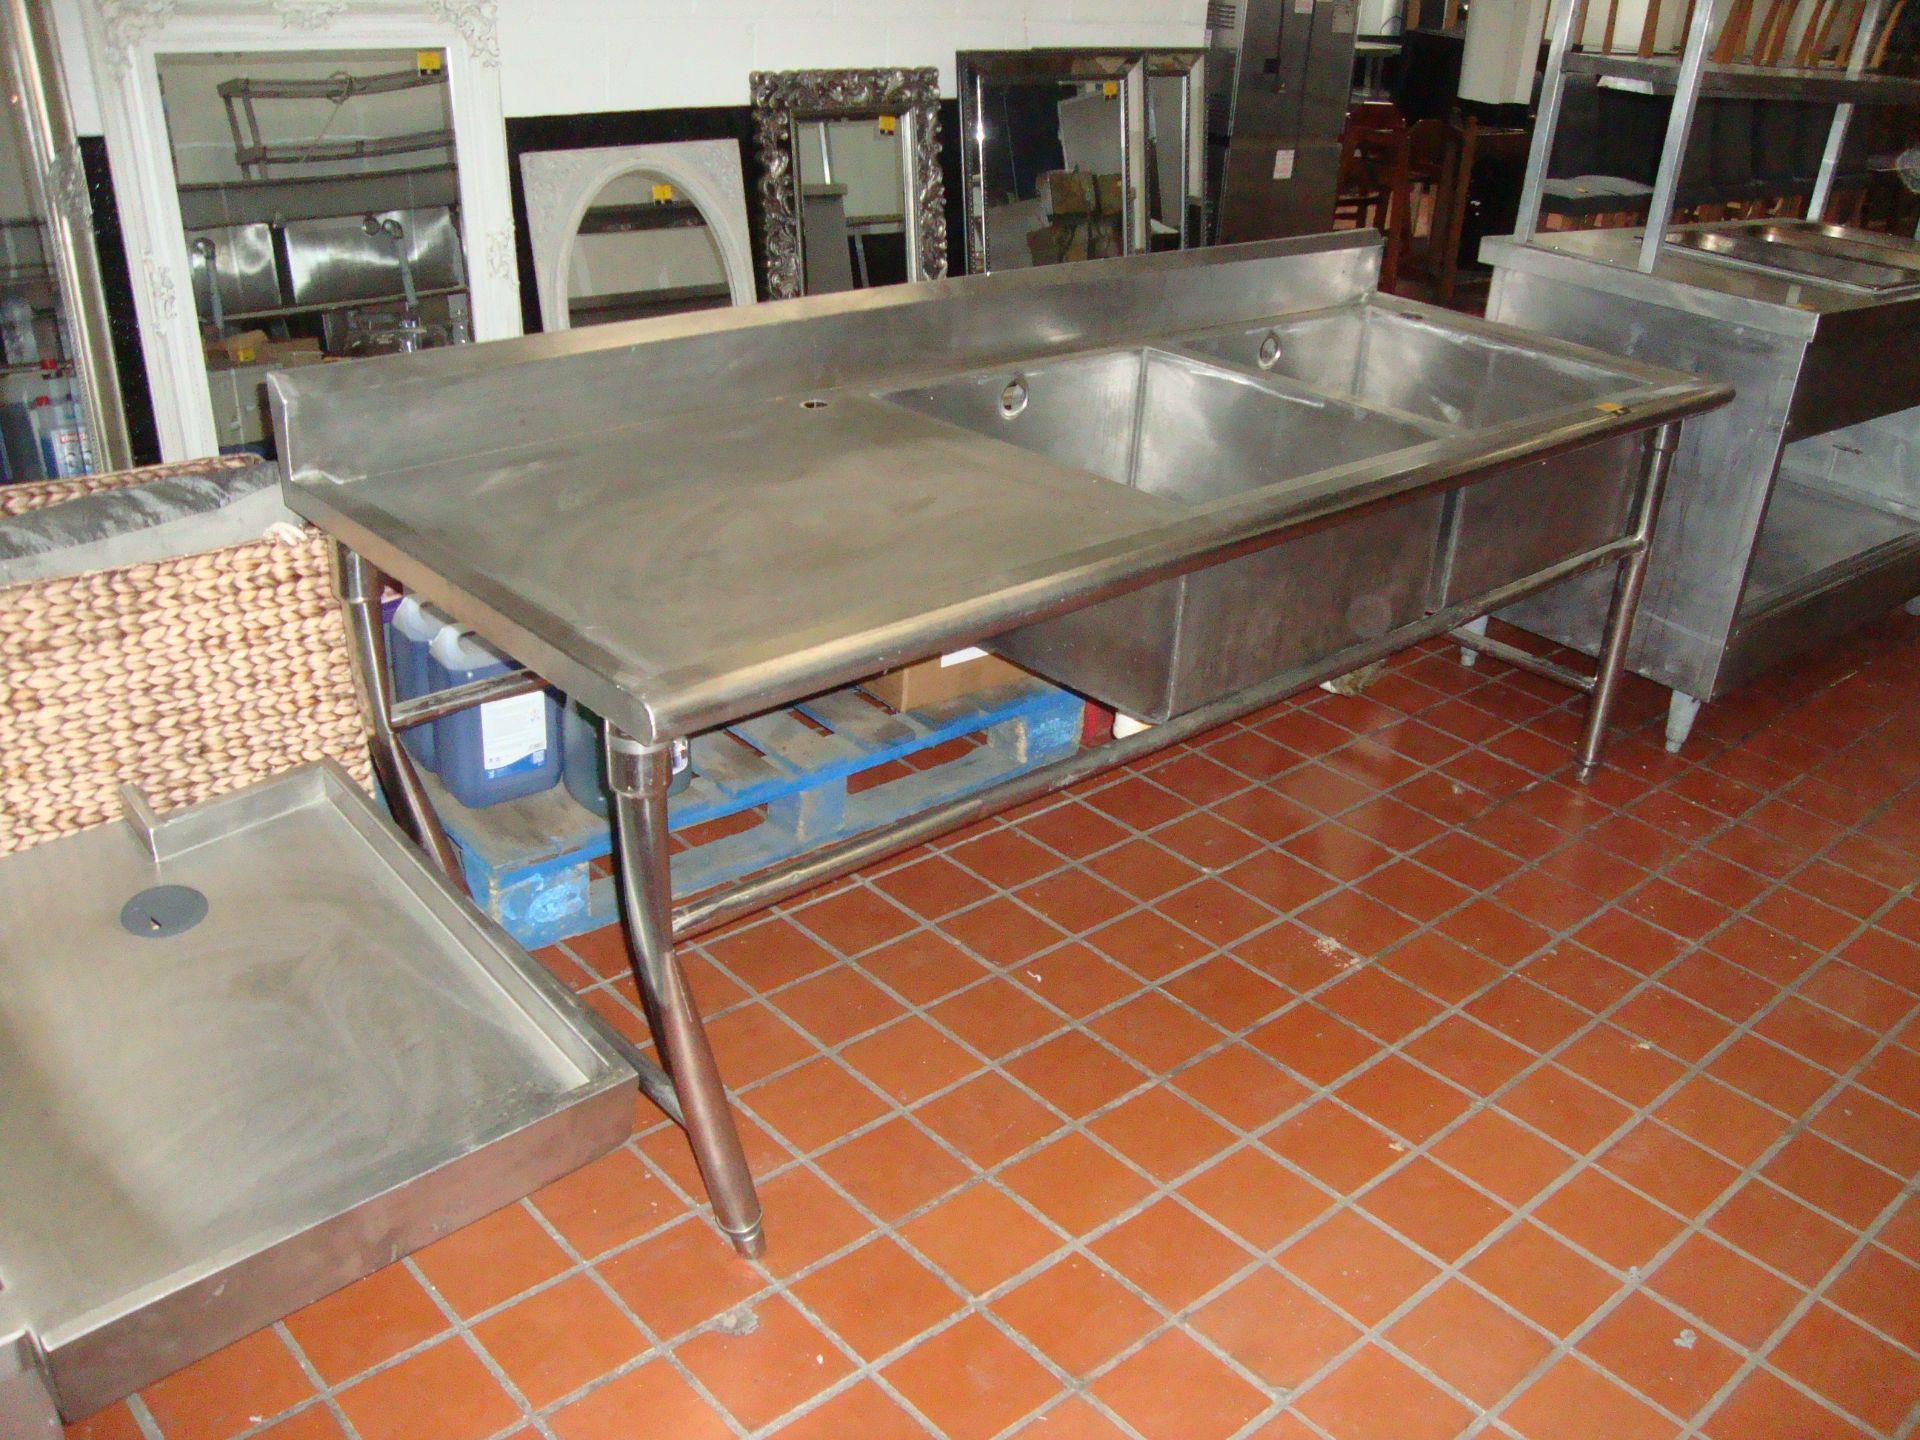 Large freestanding stainless steel twin bowl sink with max dimensions circa 87" x 31.5" x 37"